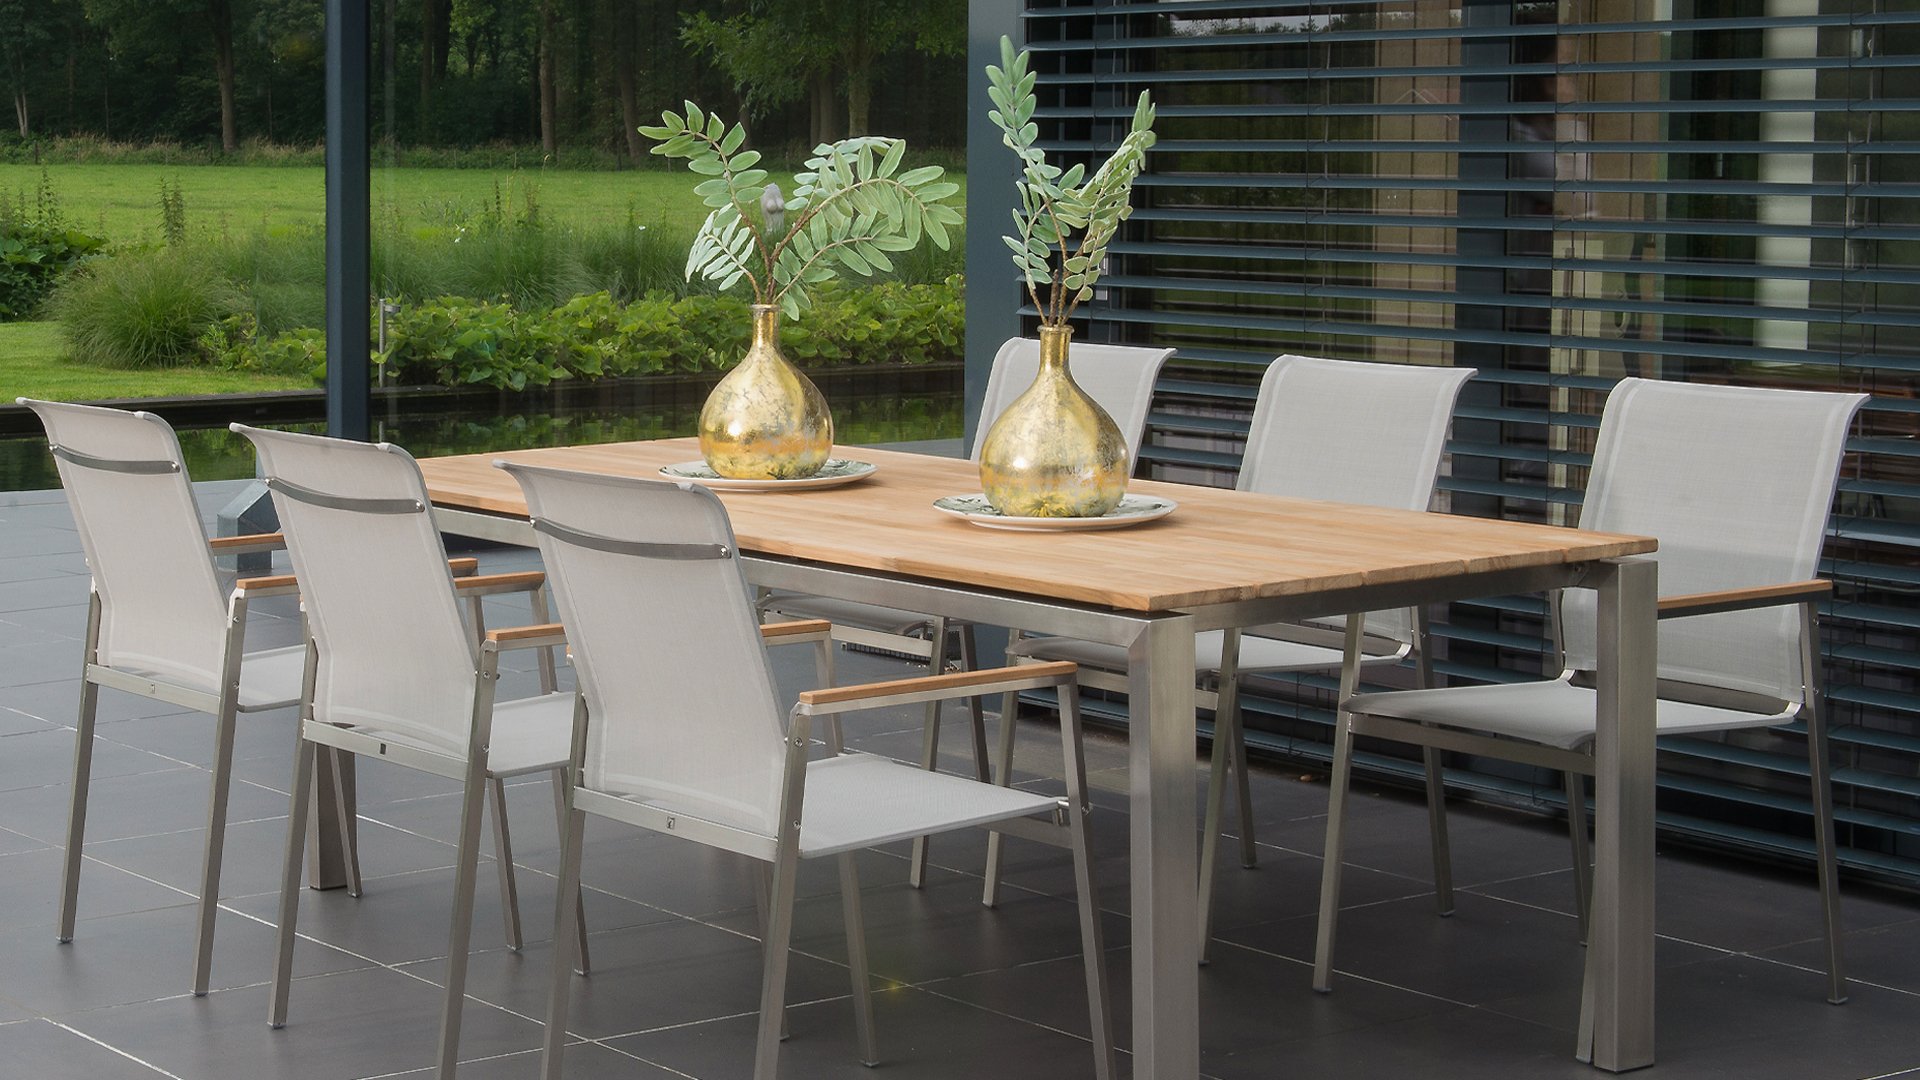 geest stam straal 4 Seasons Outdoor Passion Tuinset - Tuinmeubelkorting.nl